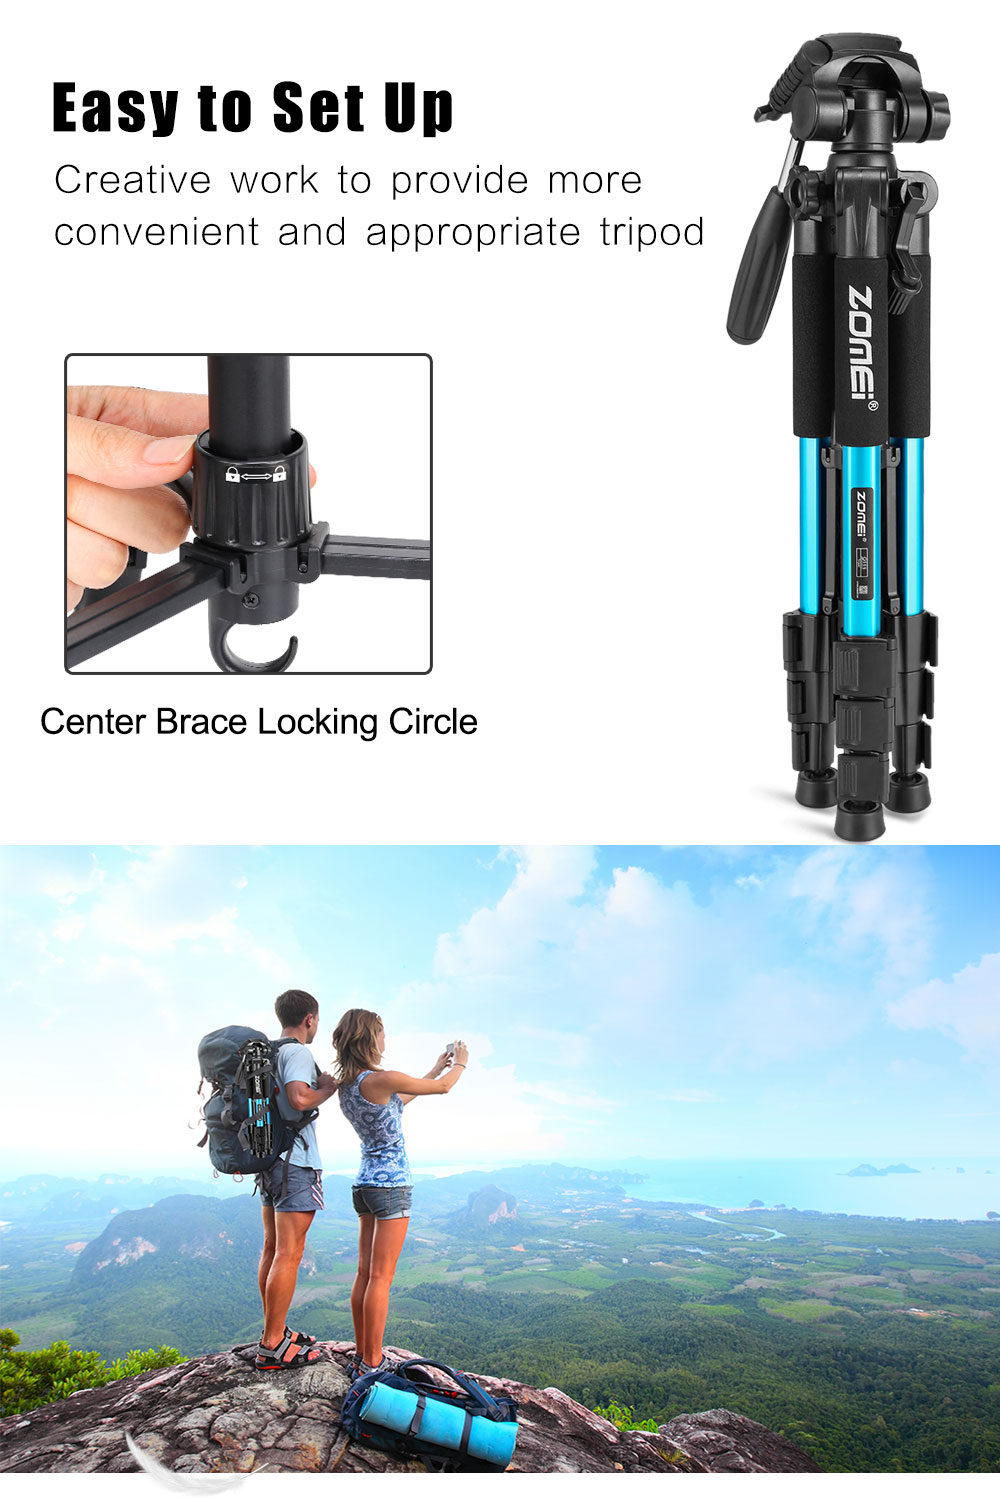 ZOMEi Q111 Portable Camera Tripod - Best Choice for Beginner and Amateur